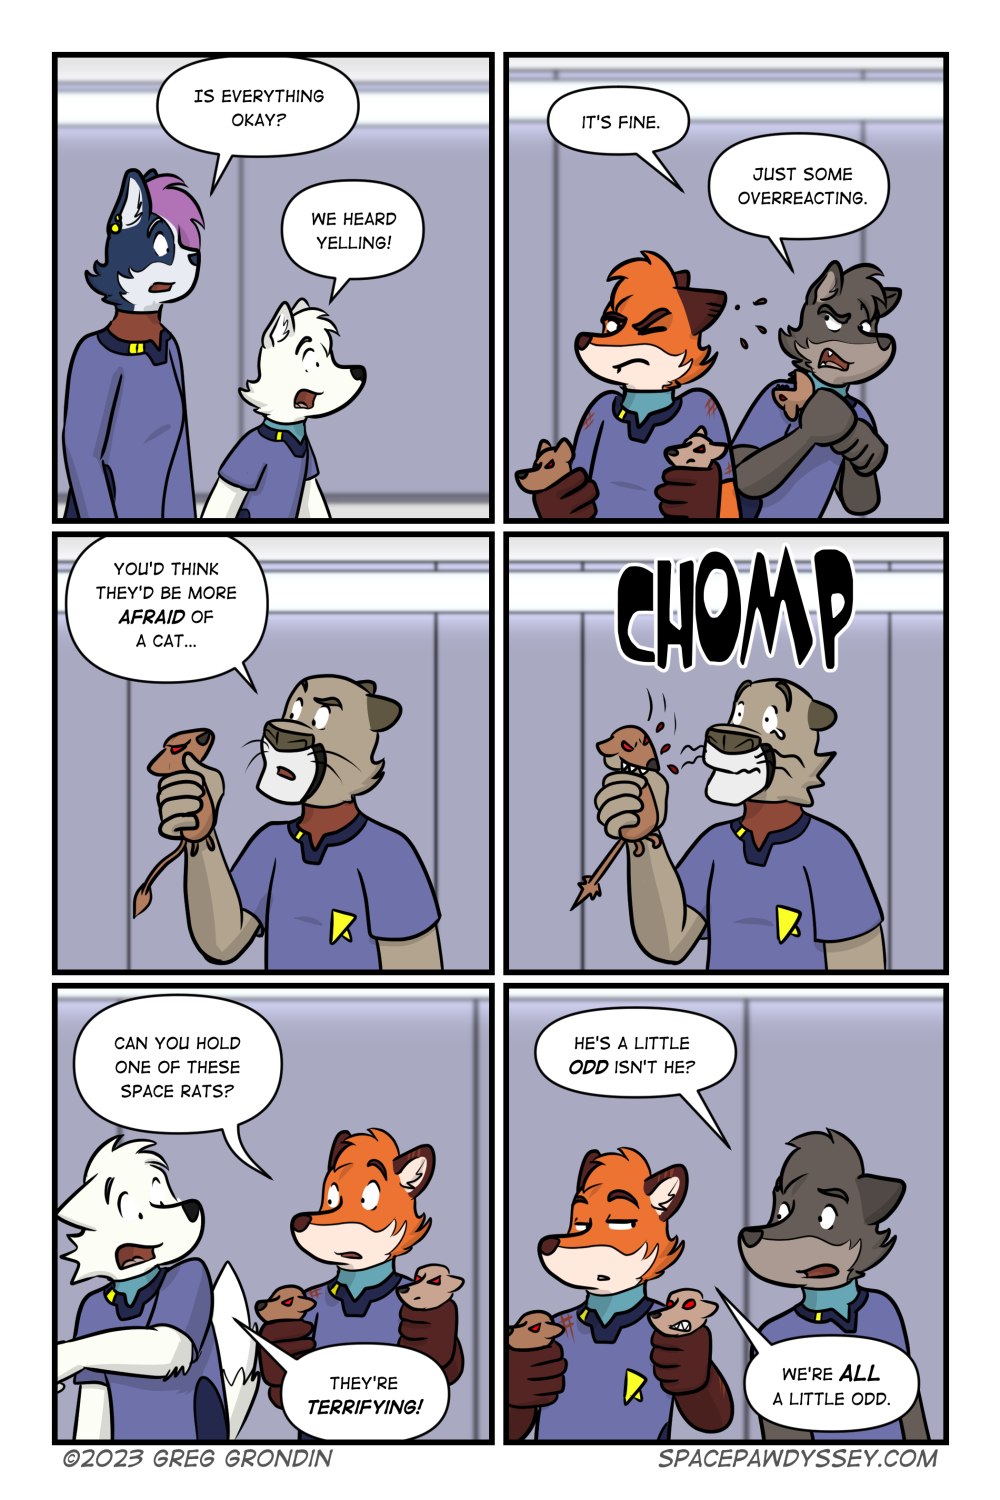 Space Pawdyssey #618